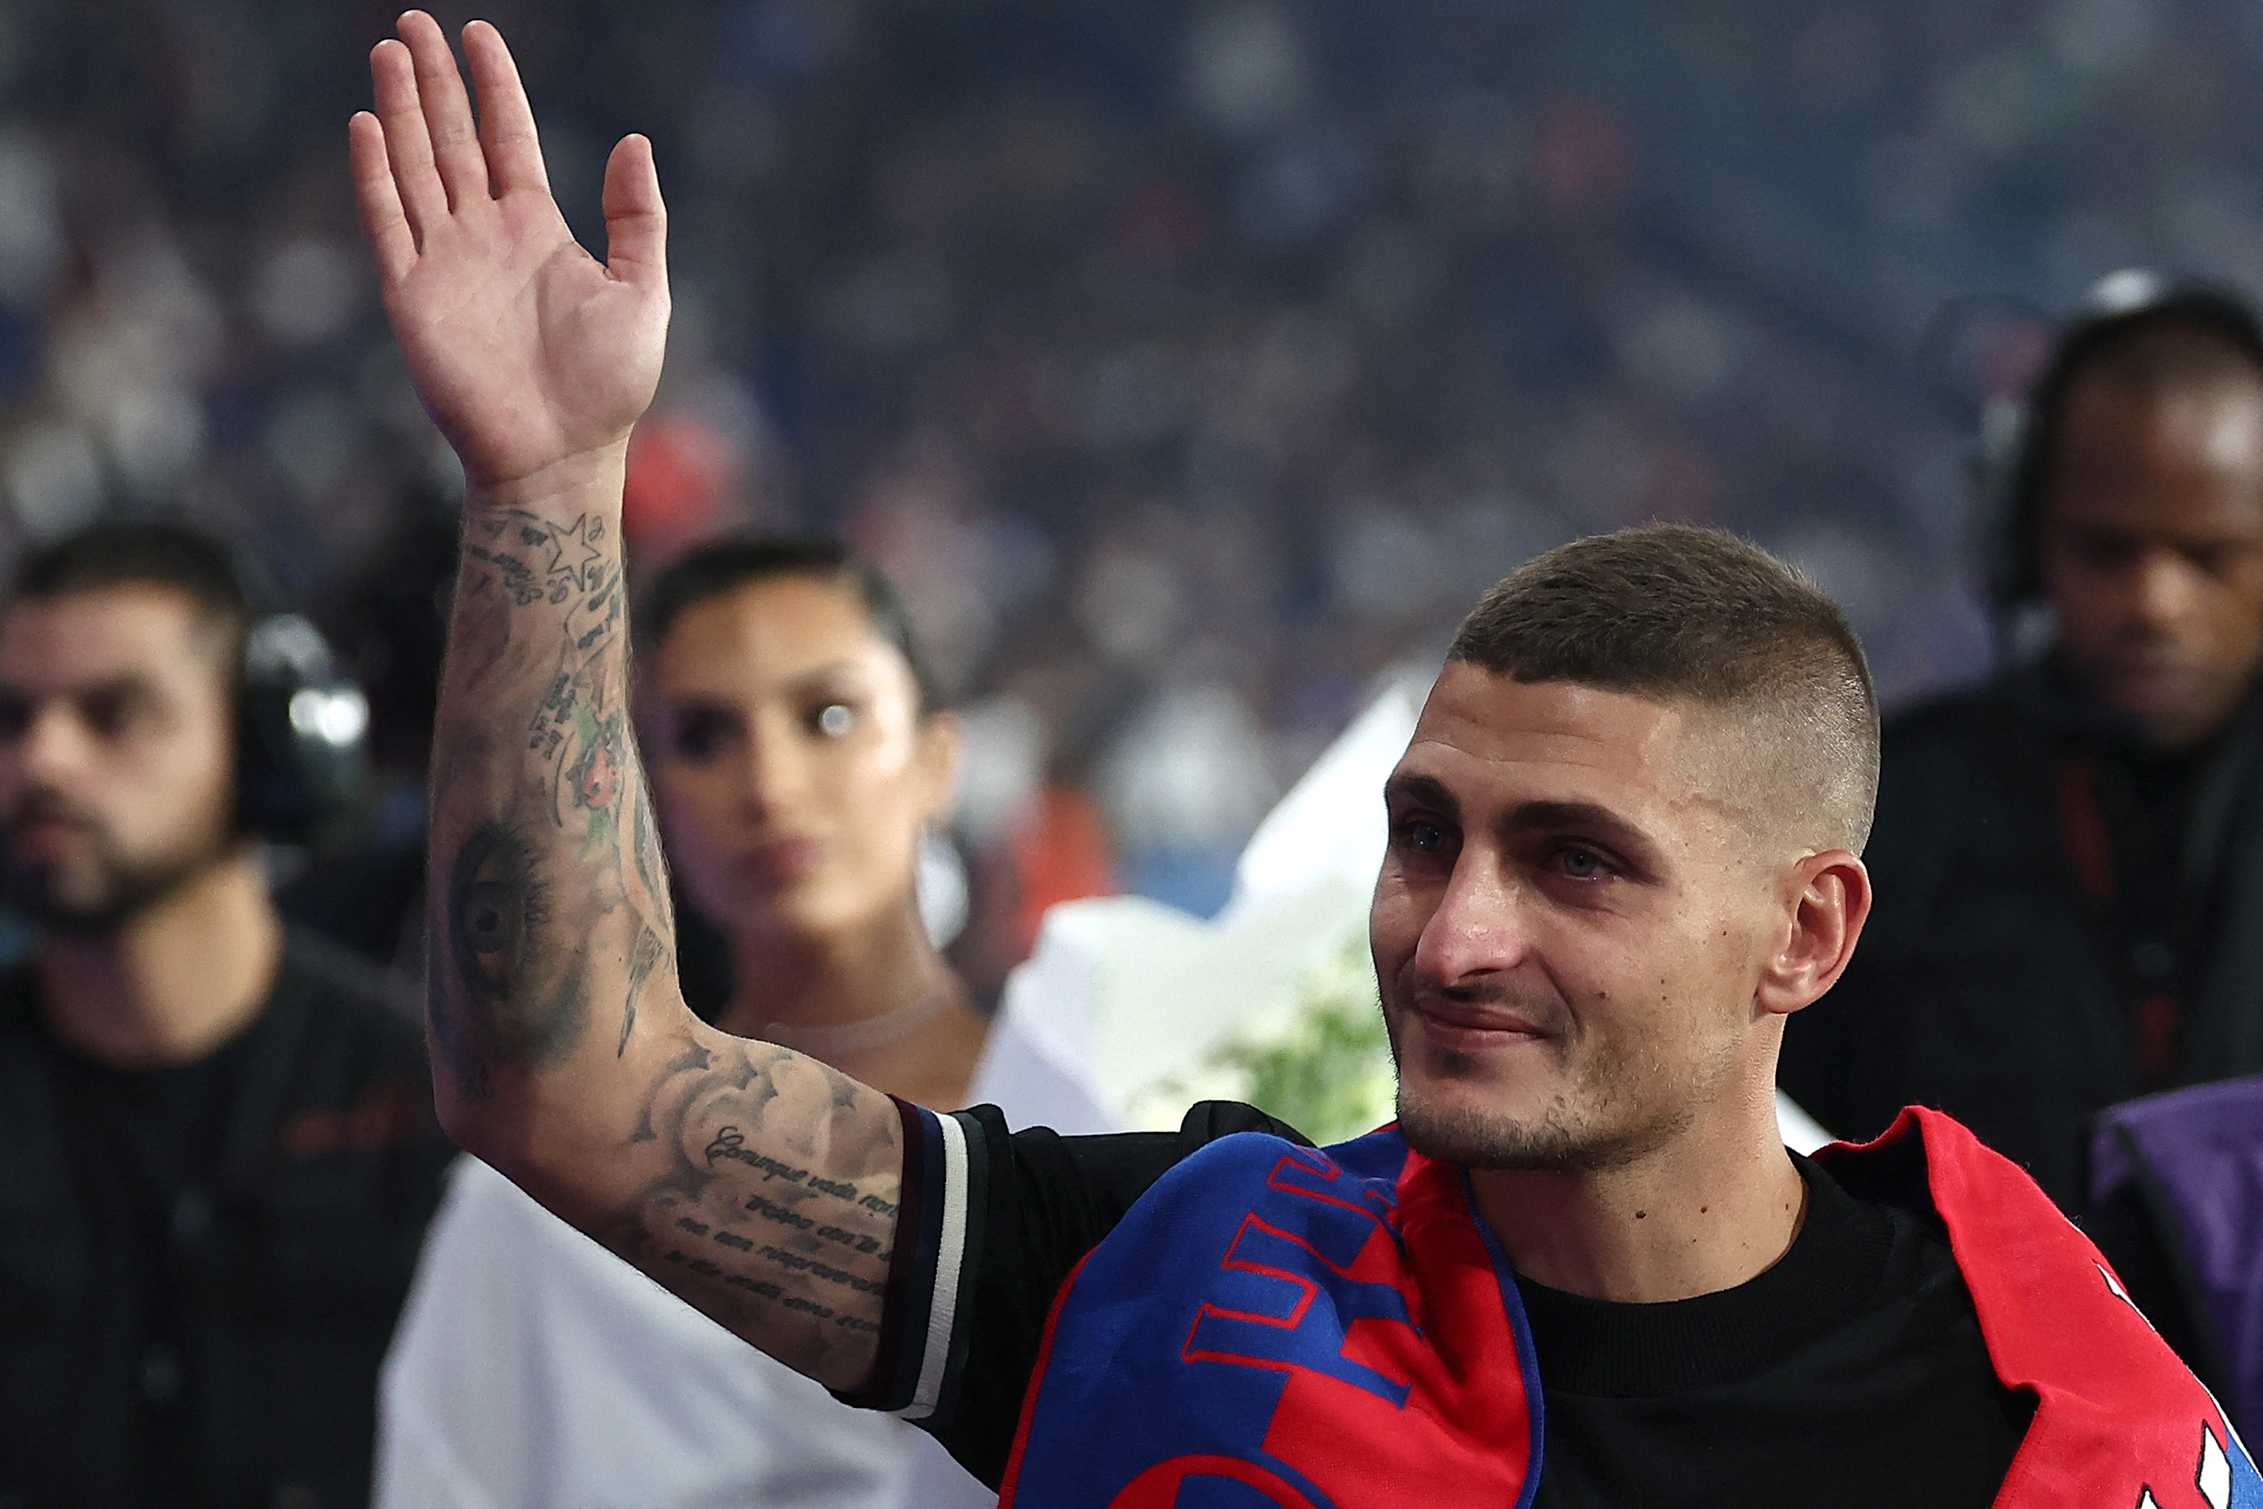 Marco Verratti left PSG to join Al-Arabi last September after a long transfer saga where he was linked to multiple sides after being targeted by Enrique.